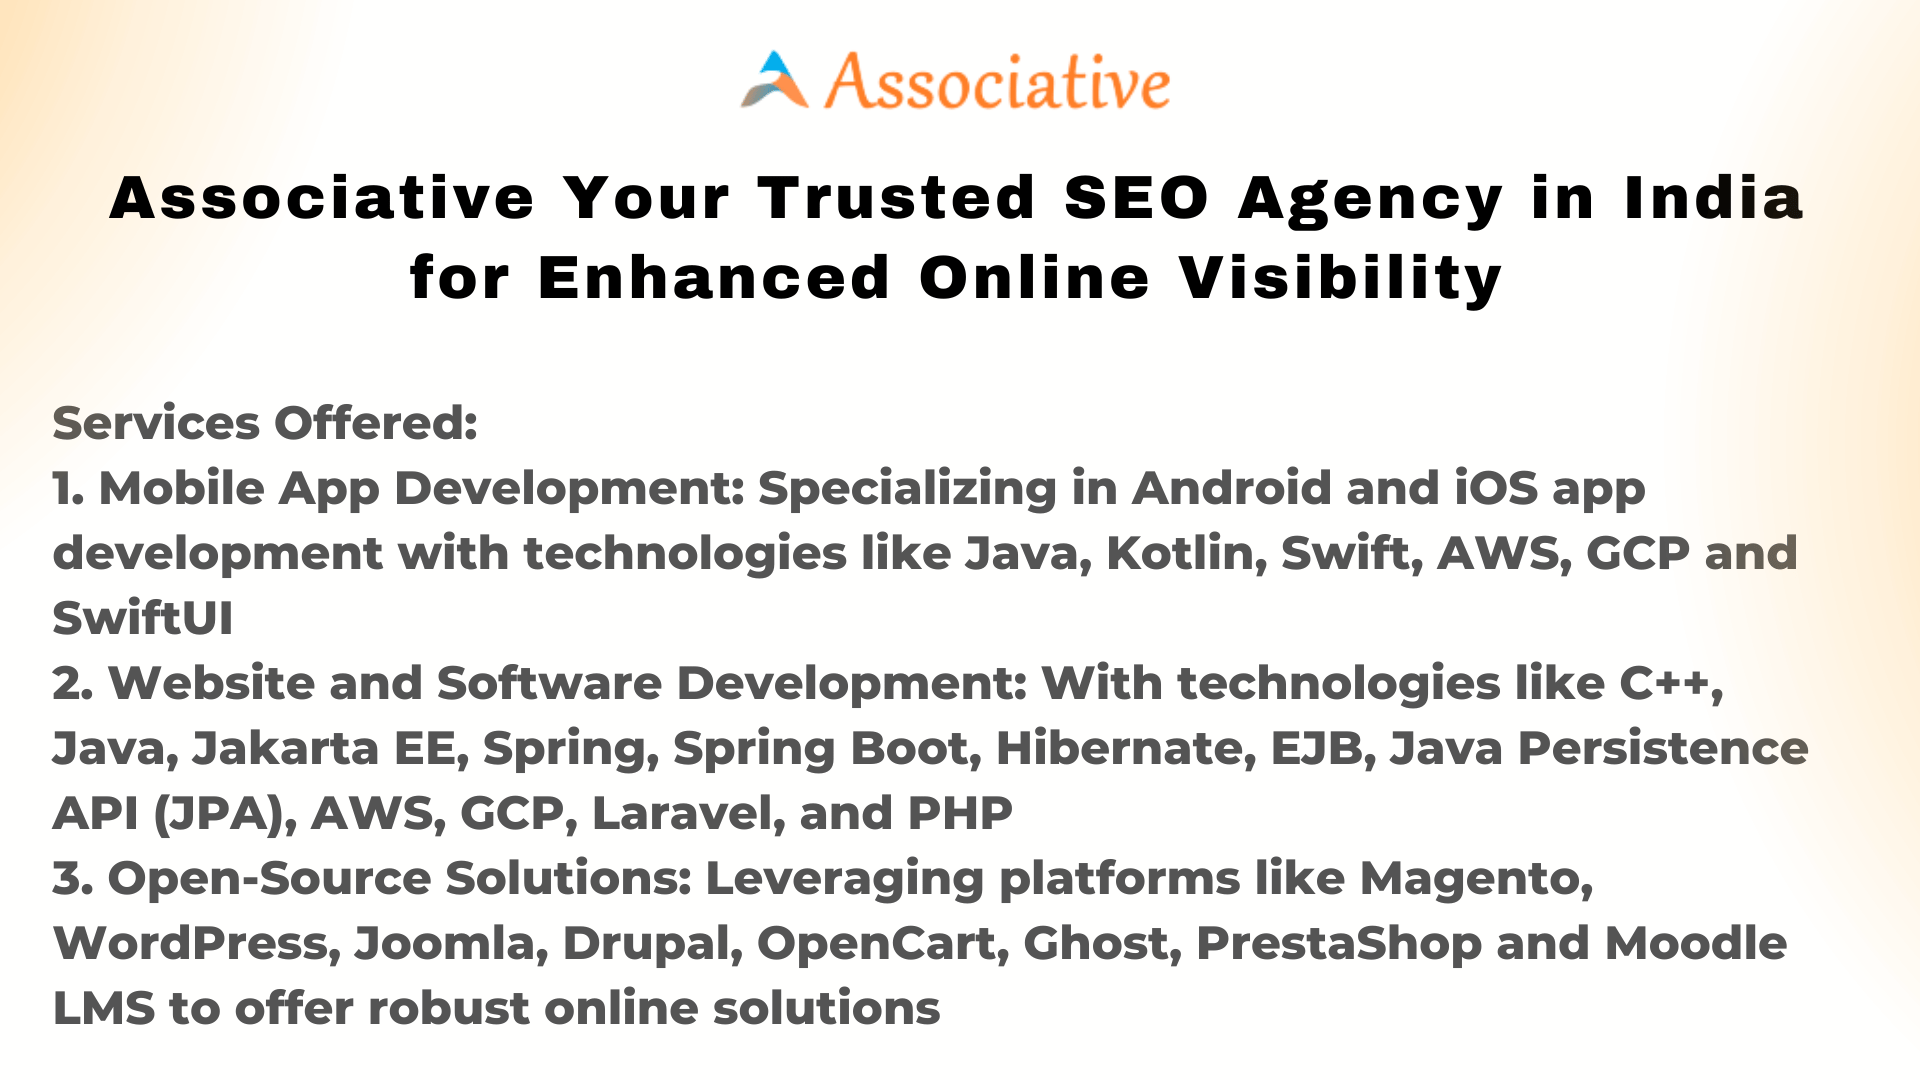 Associative Your Trusted SEO Agency in India for Enhanced Online Visibility